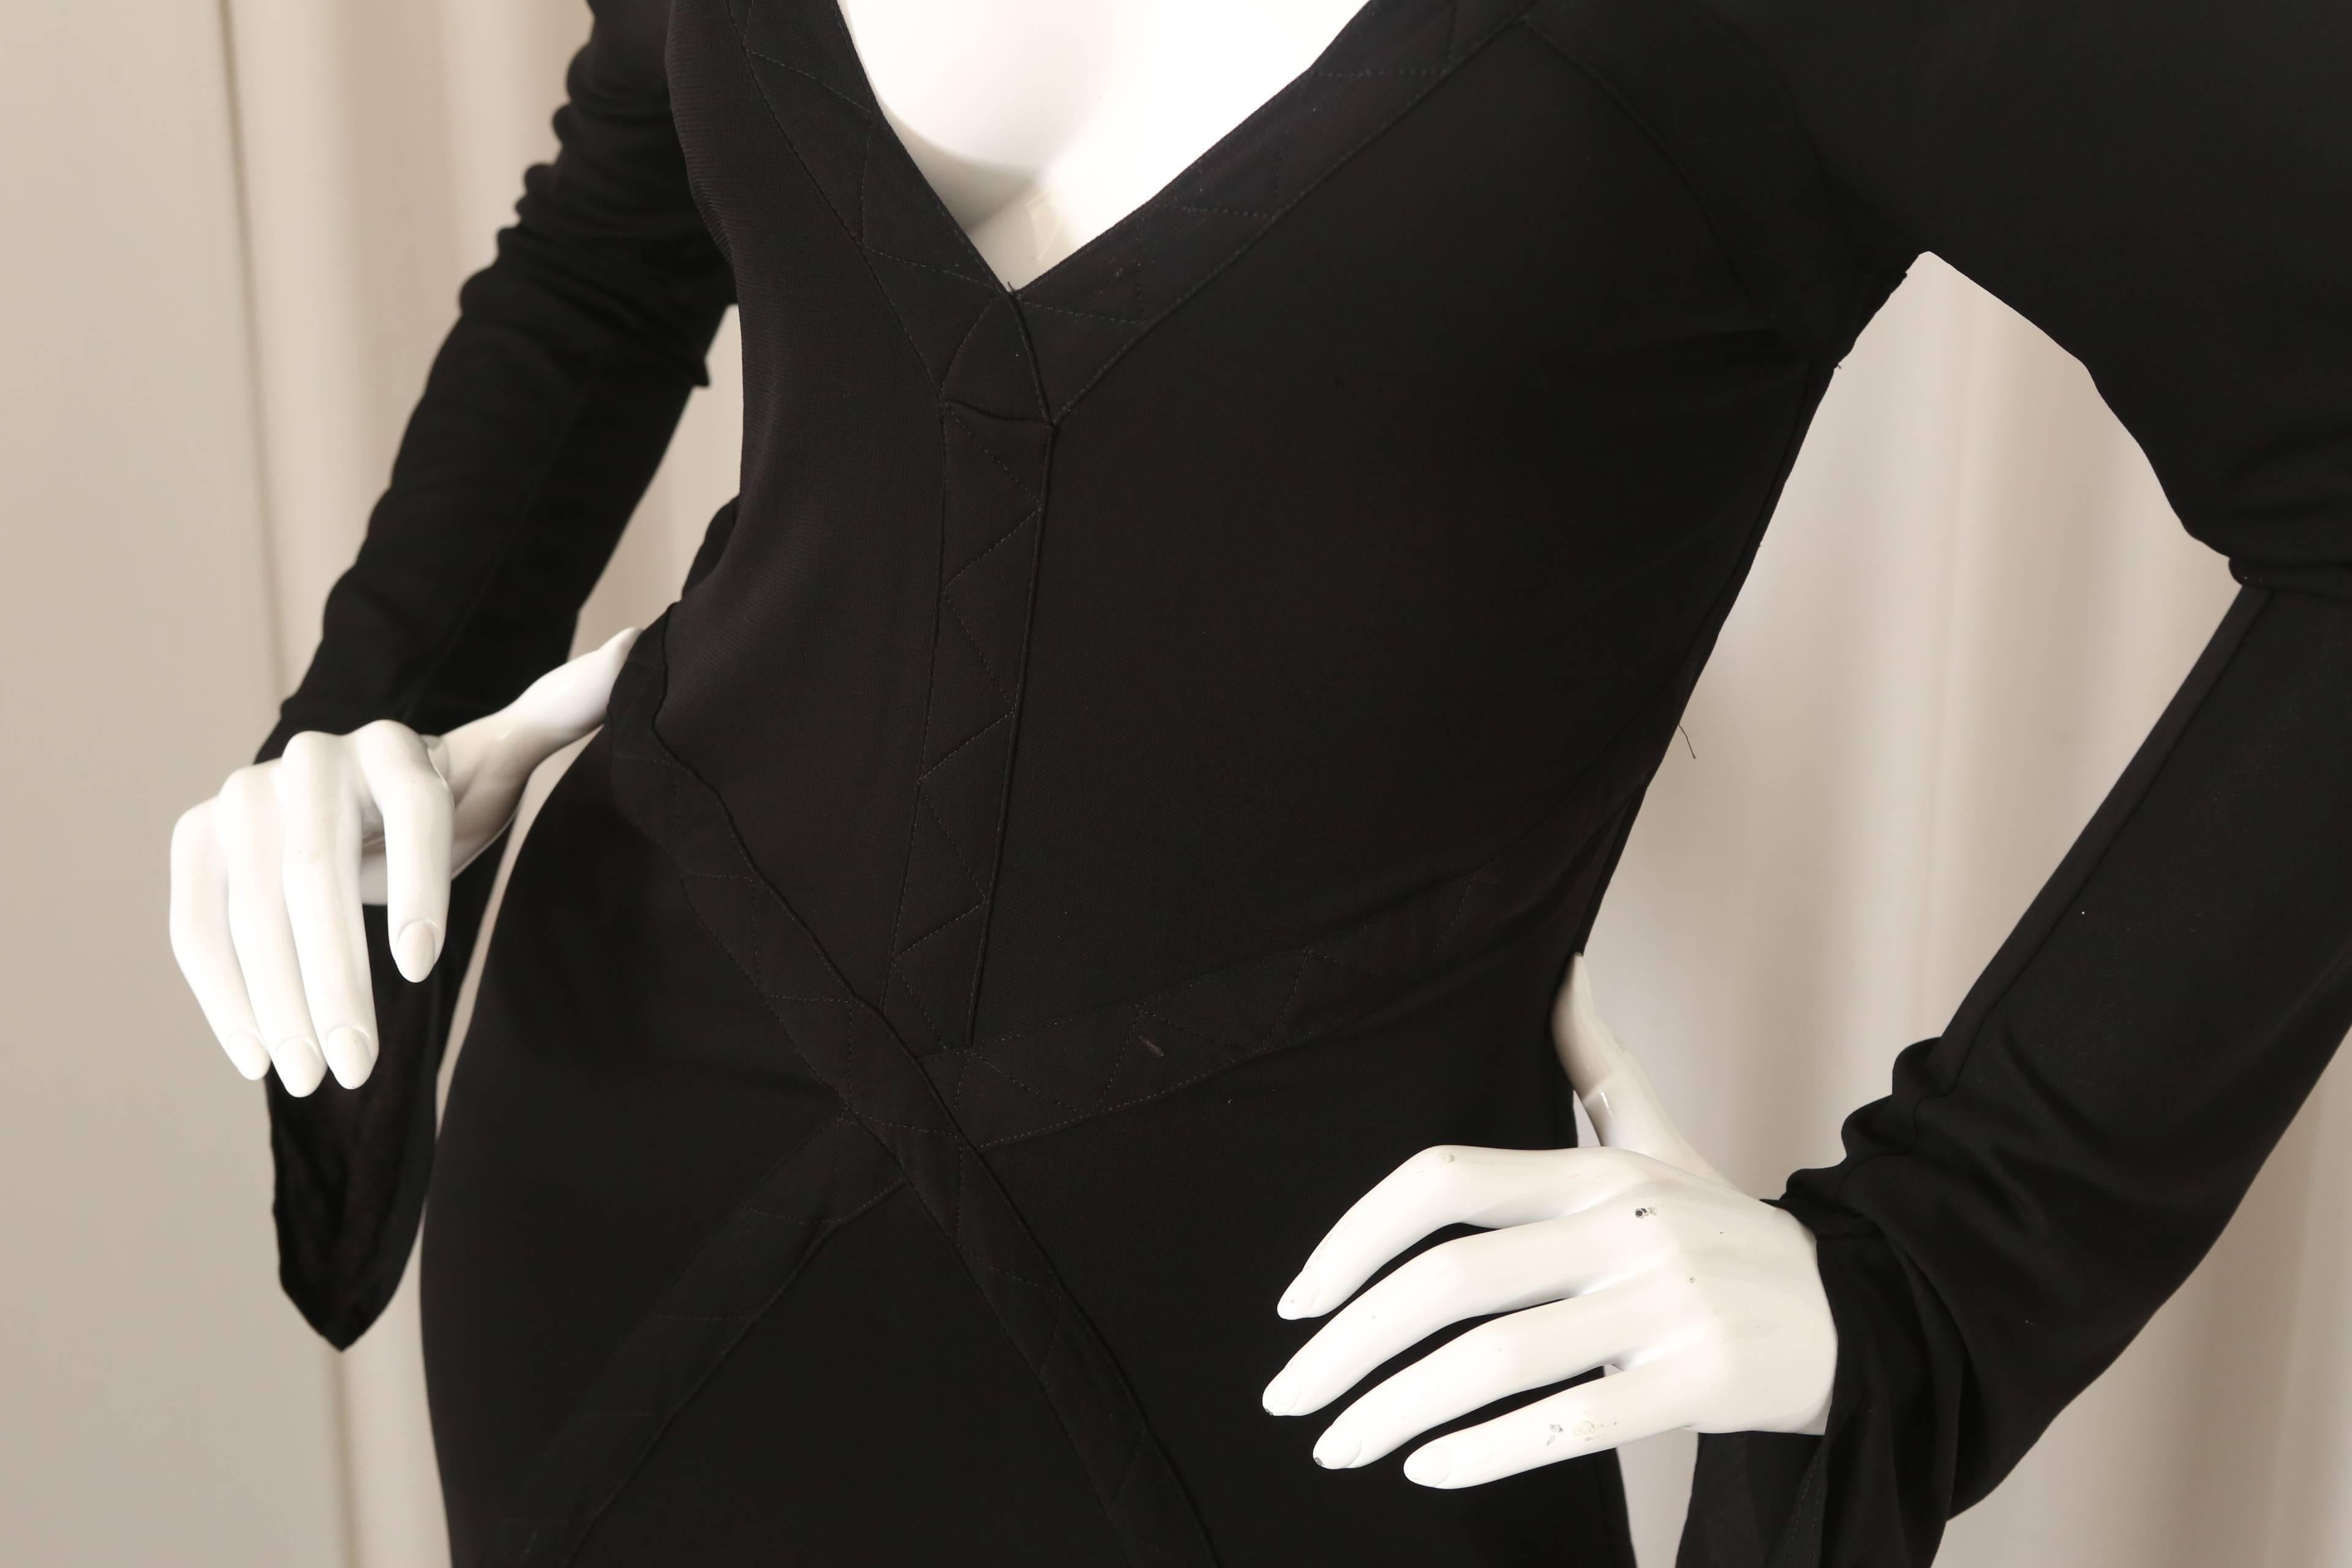 YSL black dress with bell sleeves with open back, stitching detail, v-neck and open back.
